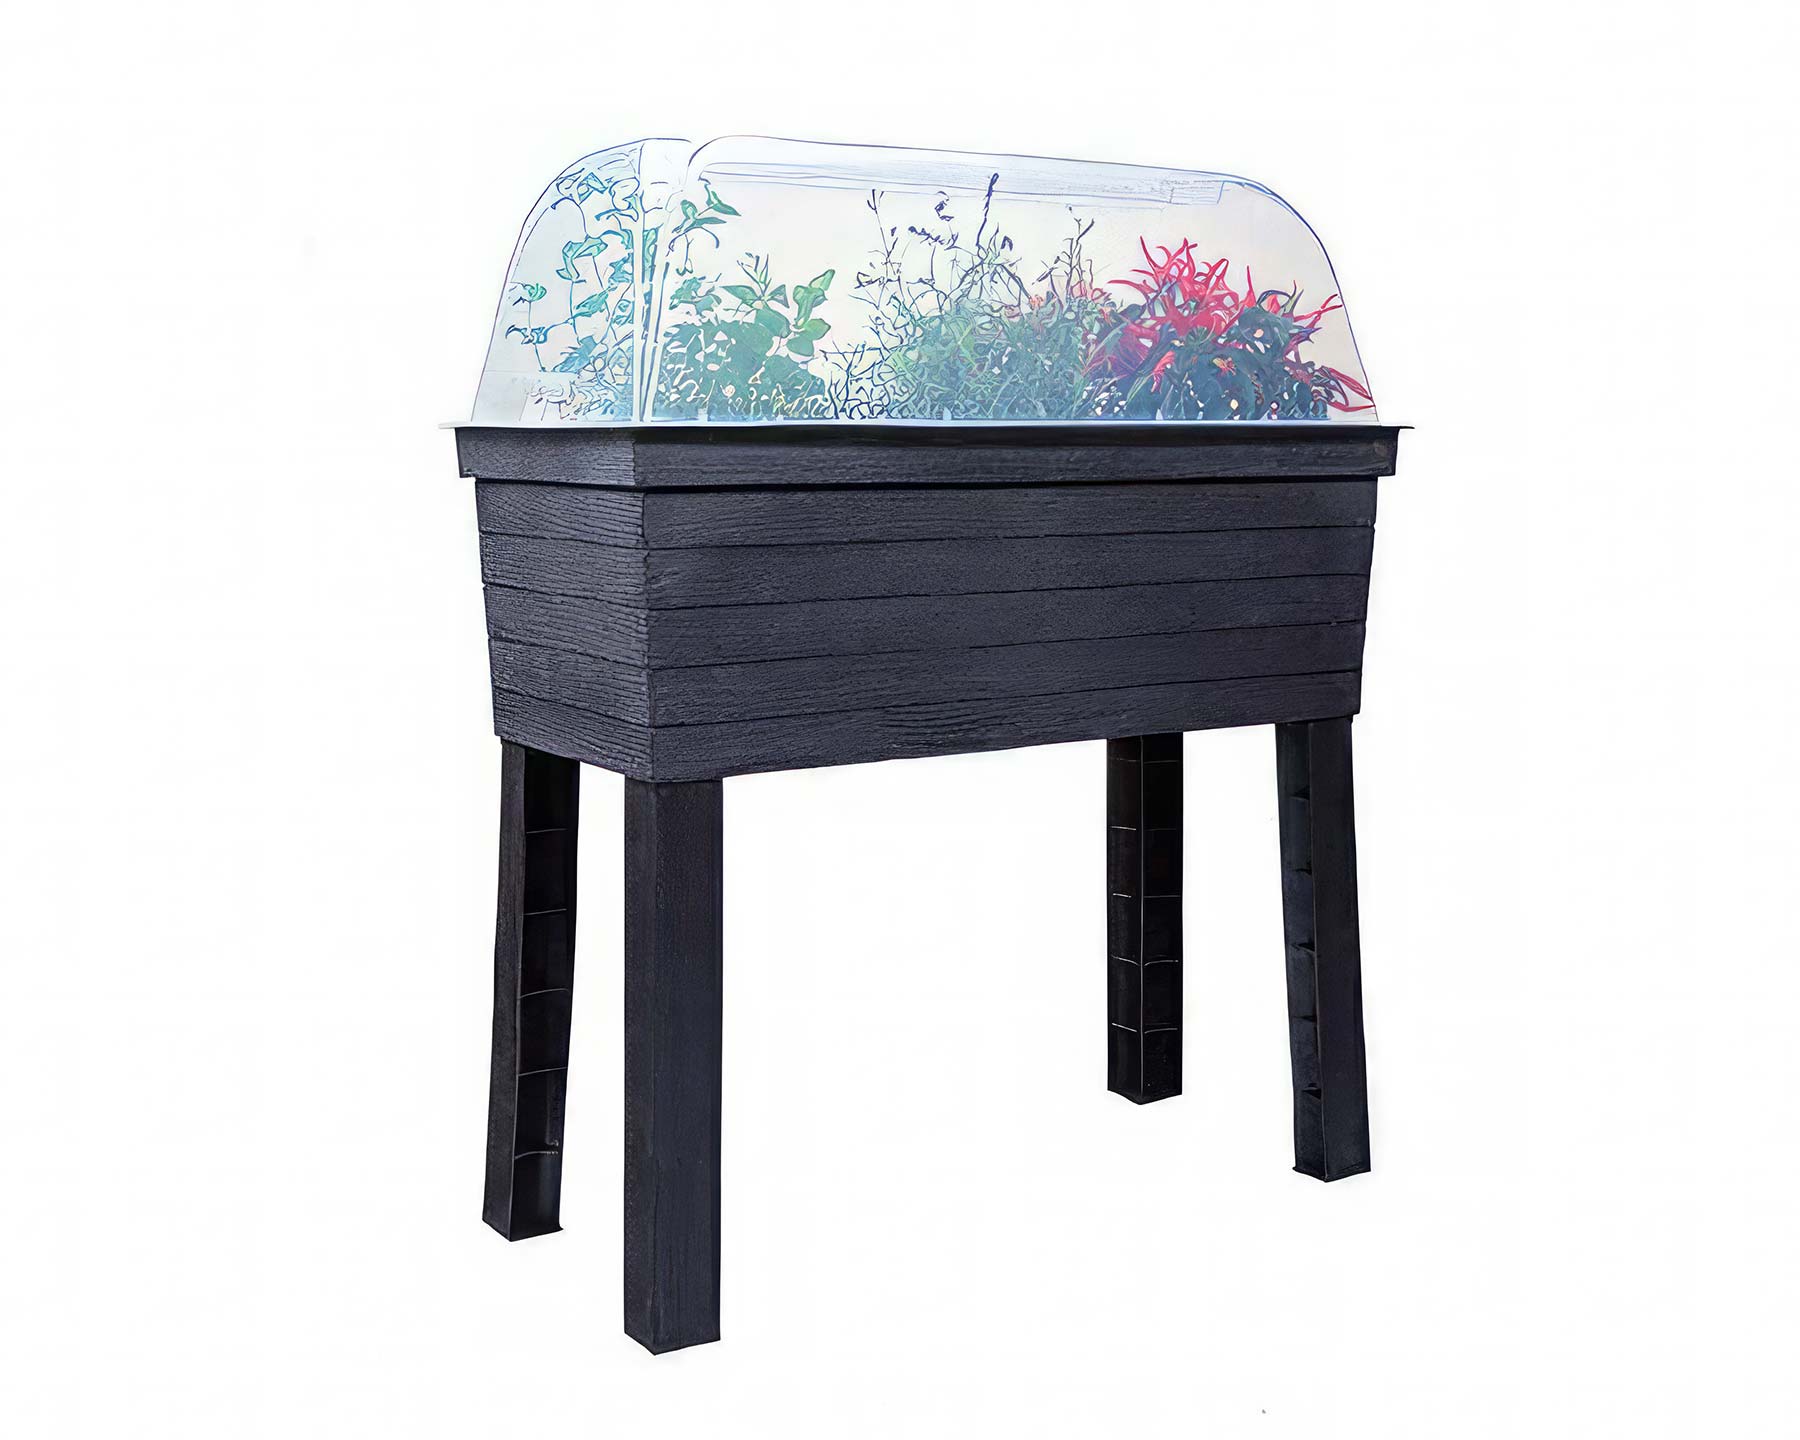 Urban Raised Planter - a cloche is also available to protect the plants and encourage faster growth of herbs and vegetables